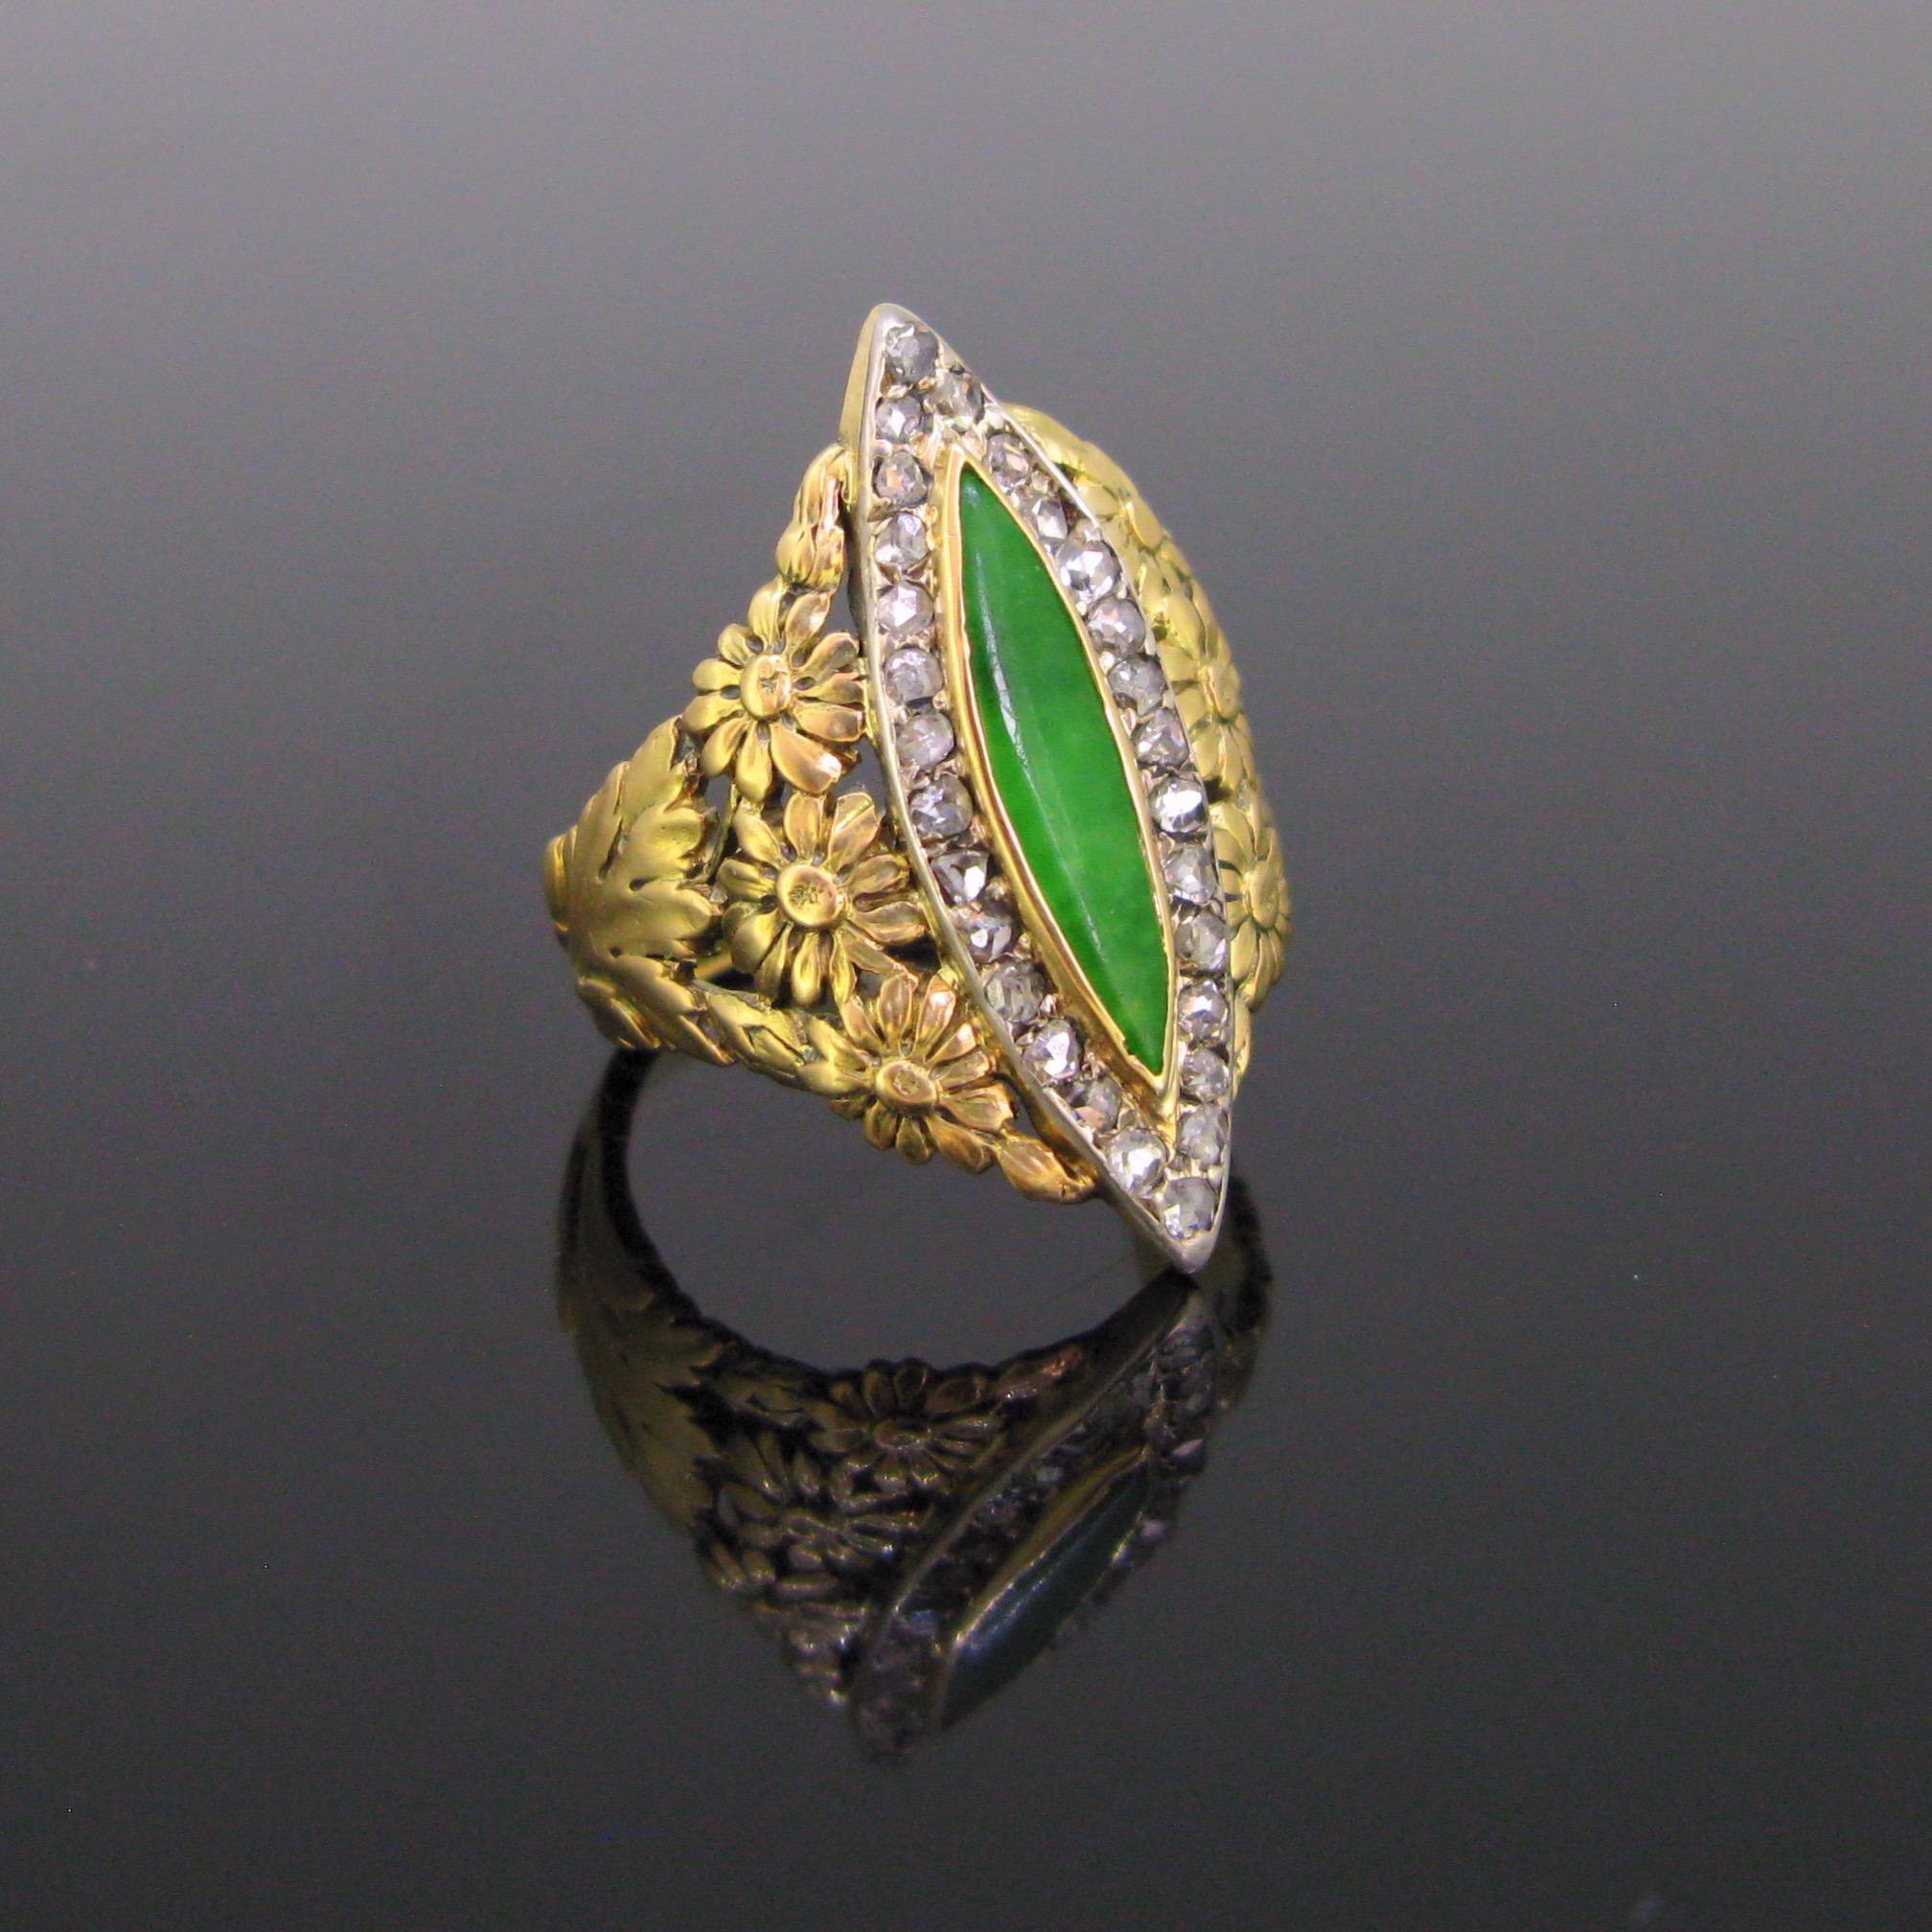 This beautiful ring is from the Art Nouveau period. It is adorned with a jadeite jade in its centre, surrounded with 28 rose cut diamonds. The shoulders of the ring have been nicely cut out into gold with flowers and leaves motifs. The diamonds are